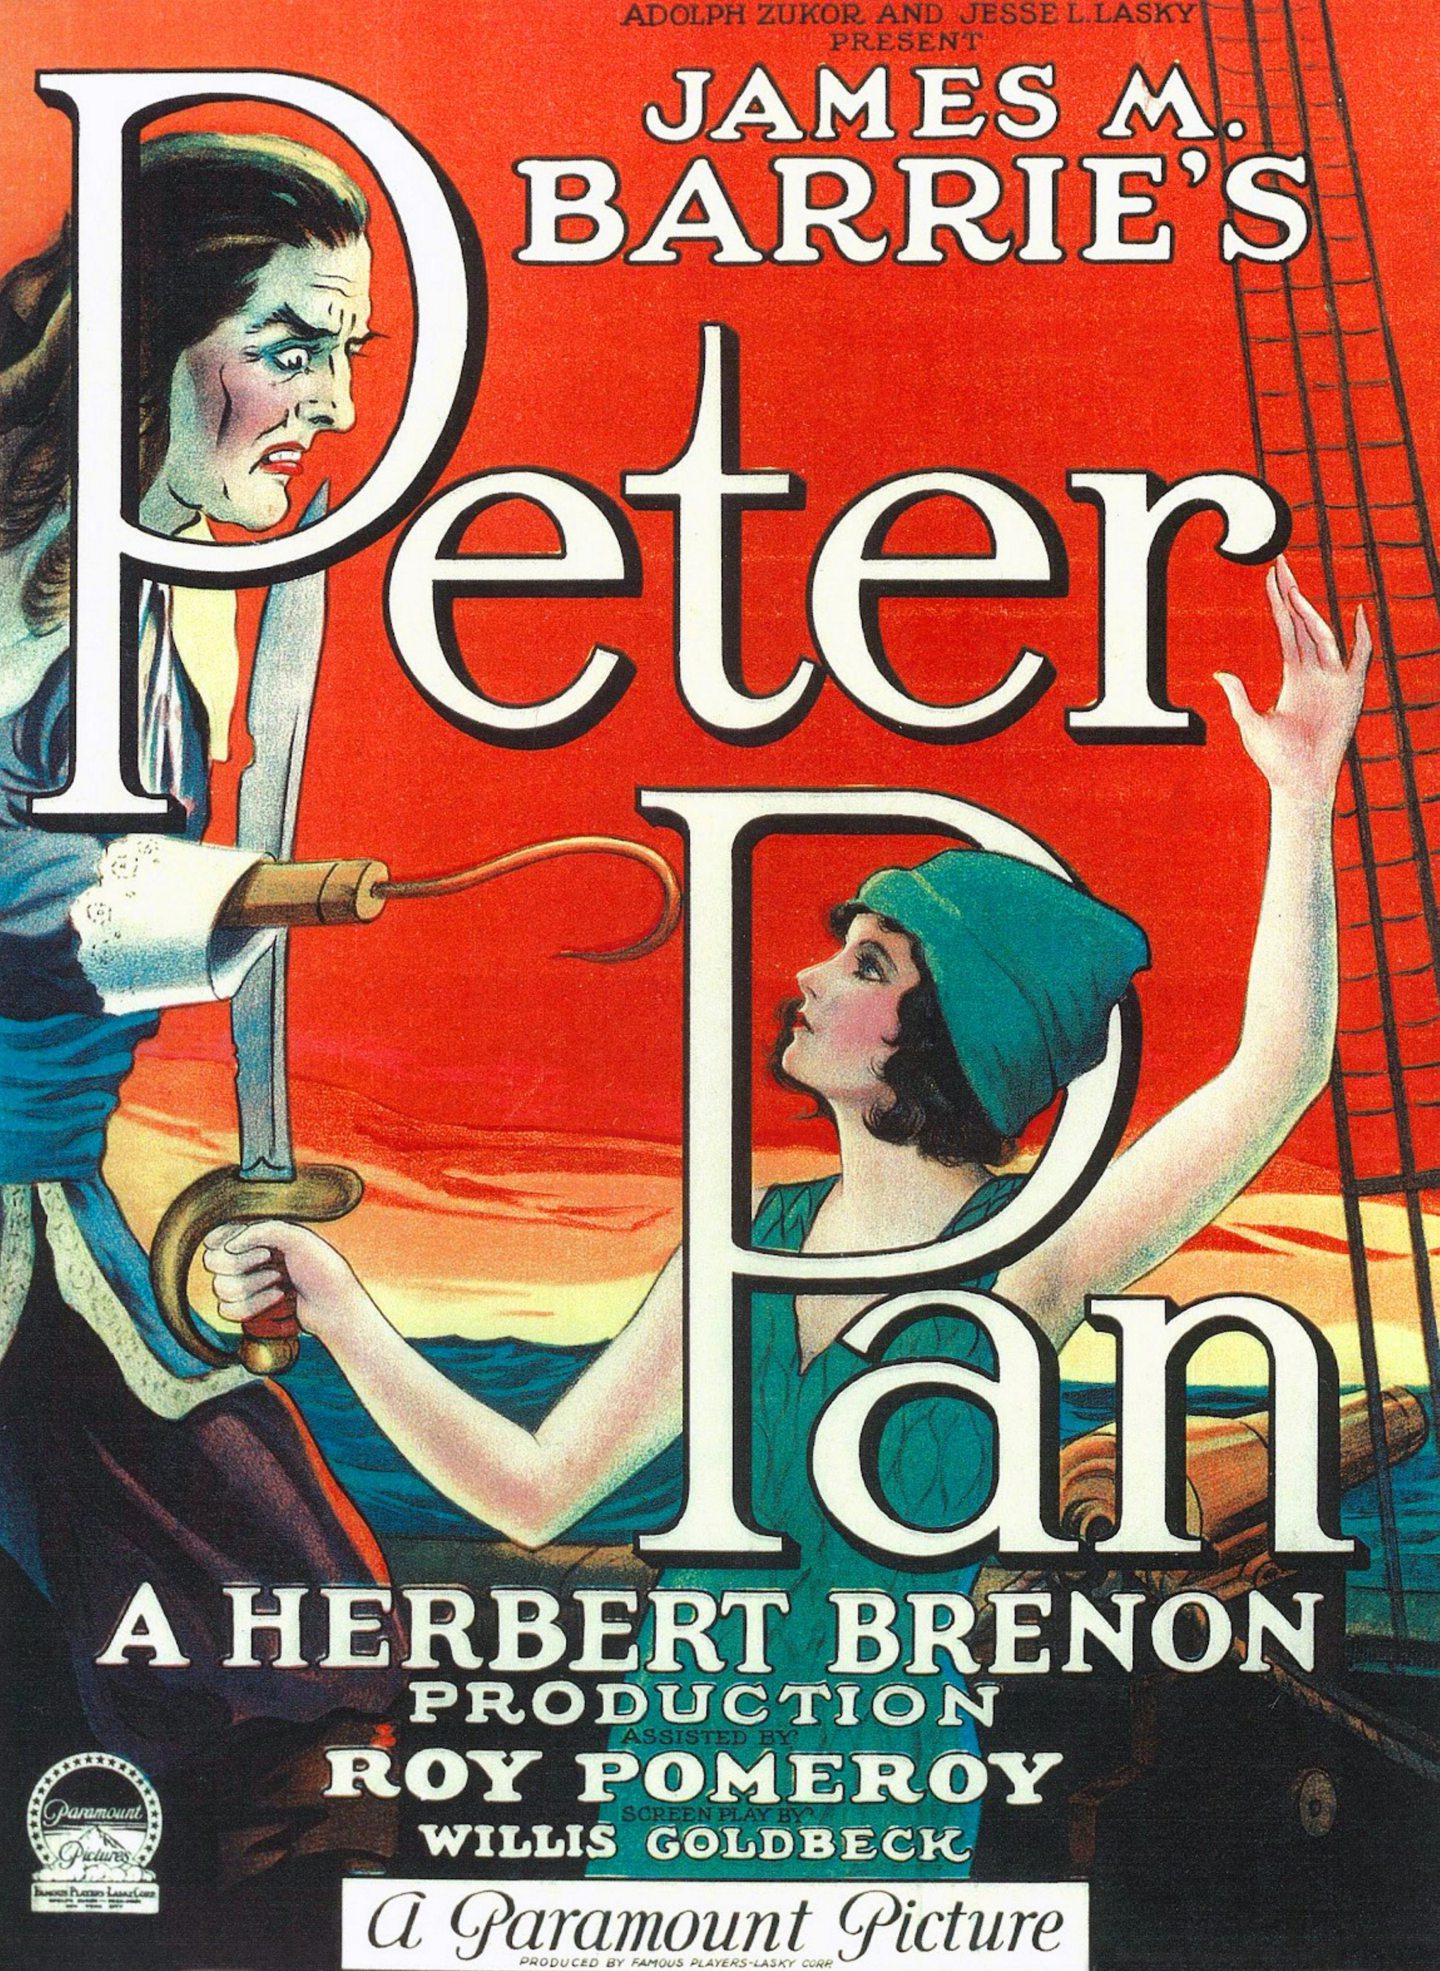 A film poster for an early adaptation of Peter Pan